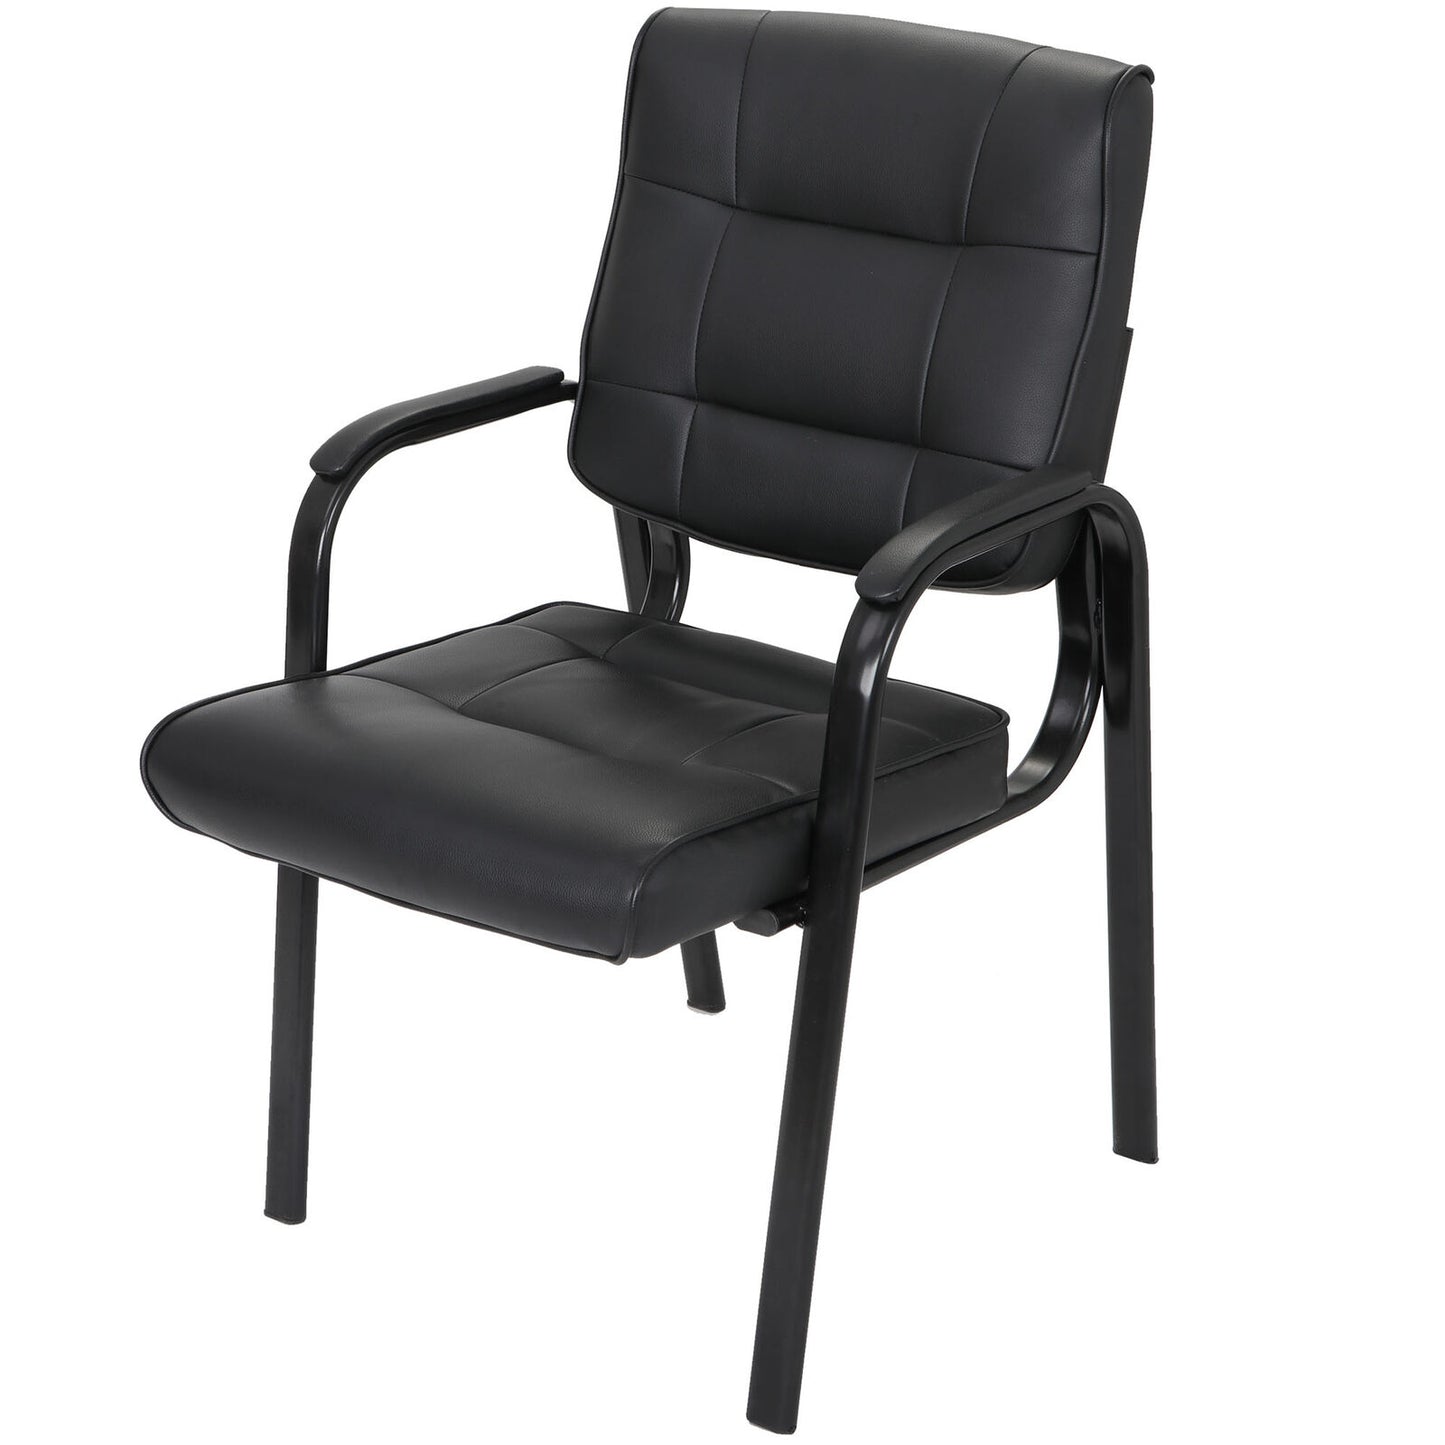 Leather Guest Chair Black Waiting Room Office Desk Side Chairs Reception